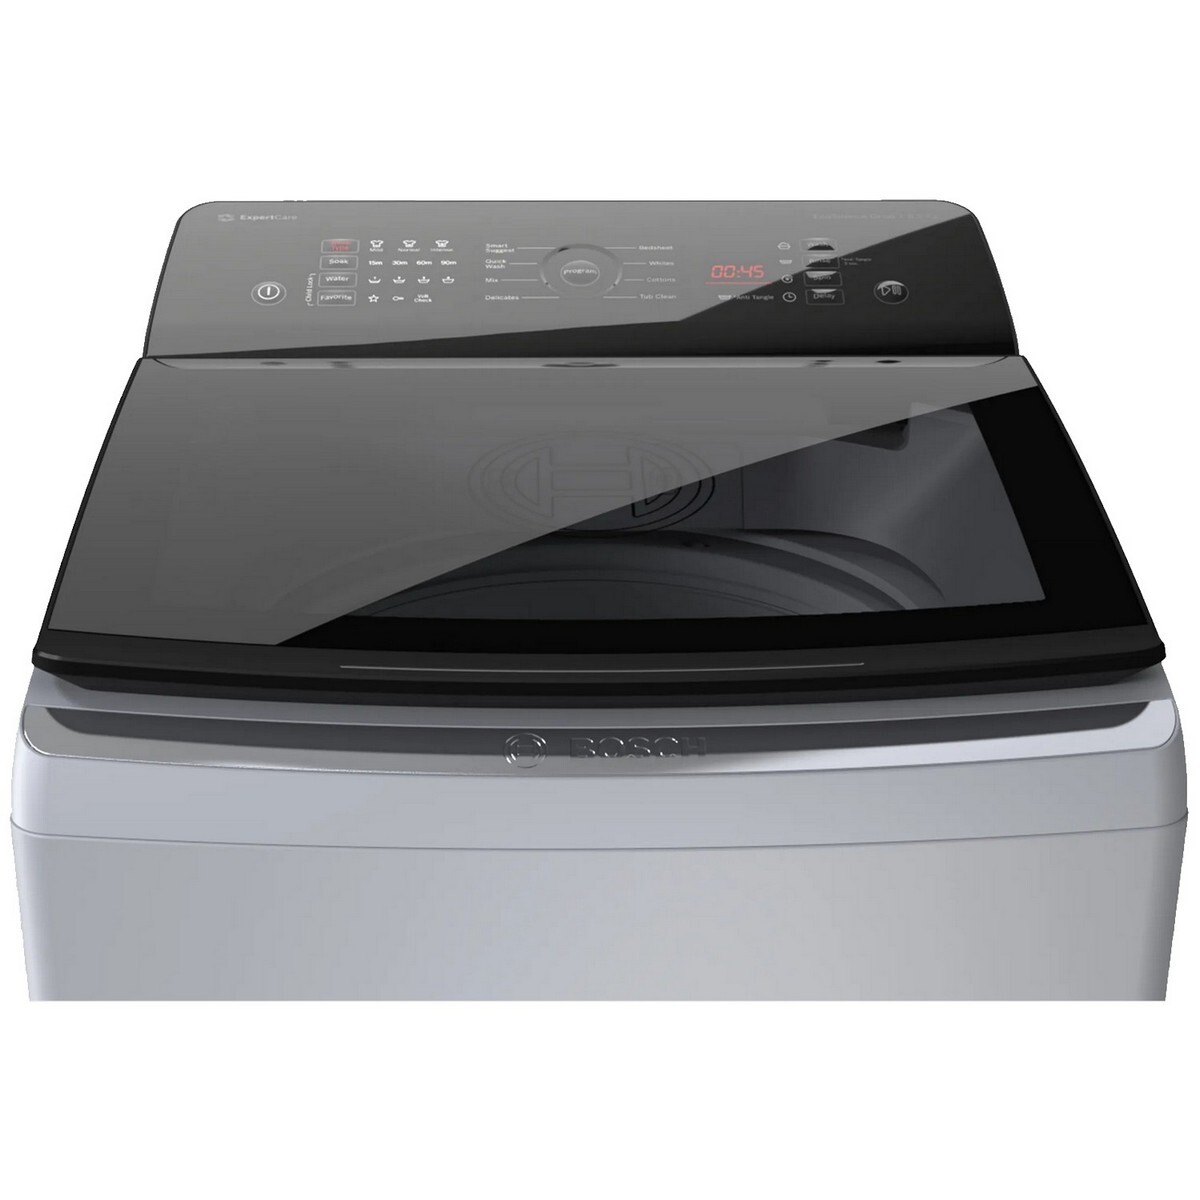 Bosch Fully Automatic Top Load Washing Machine WOE802S7IN 8Kg